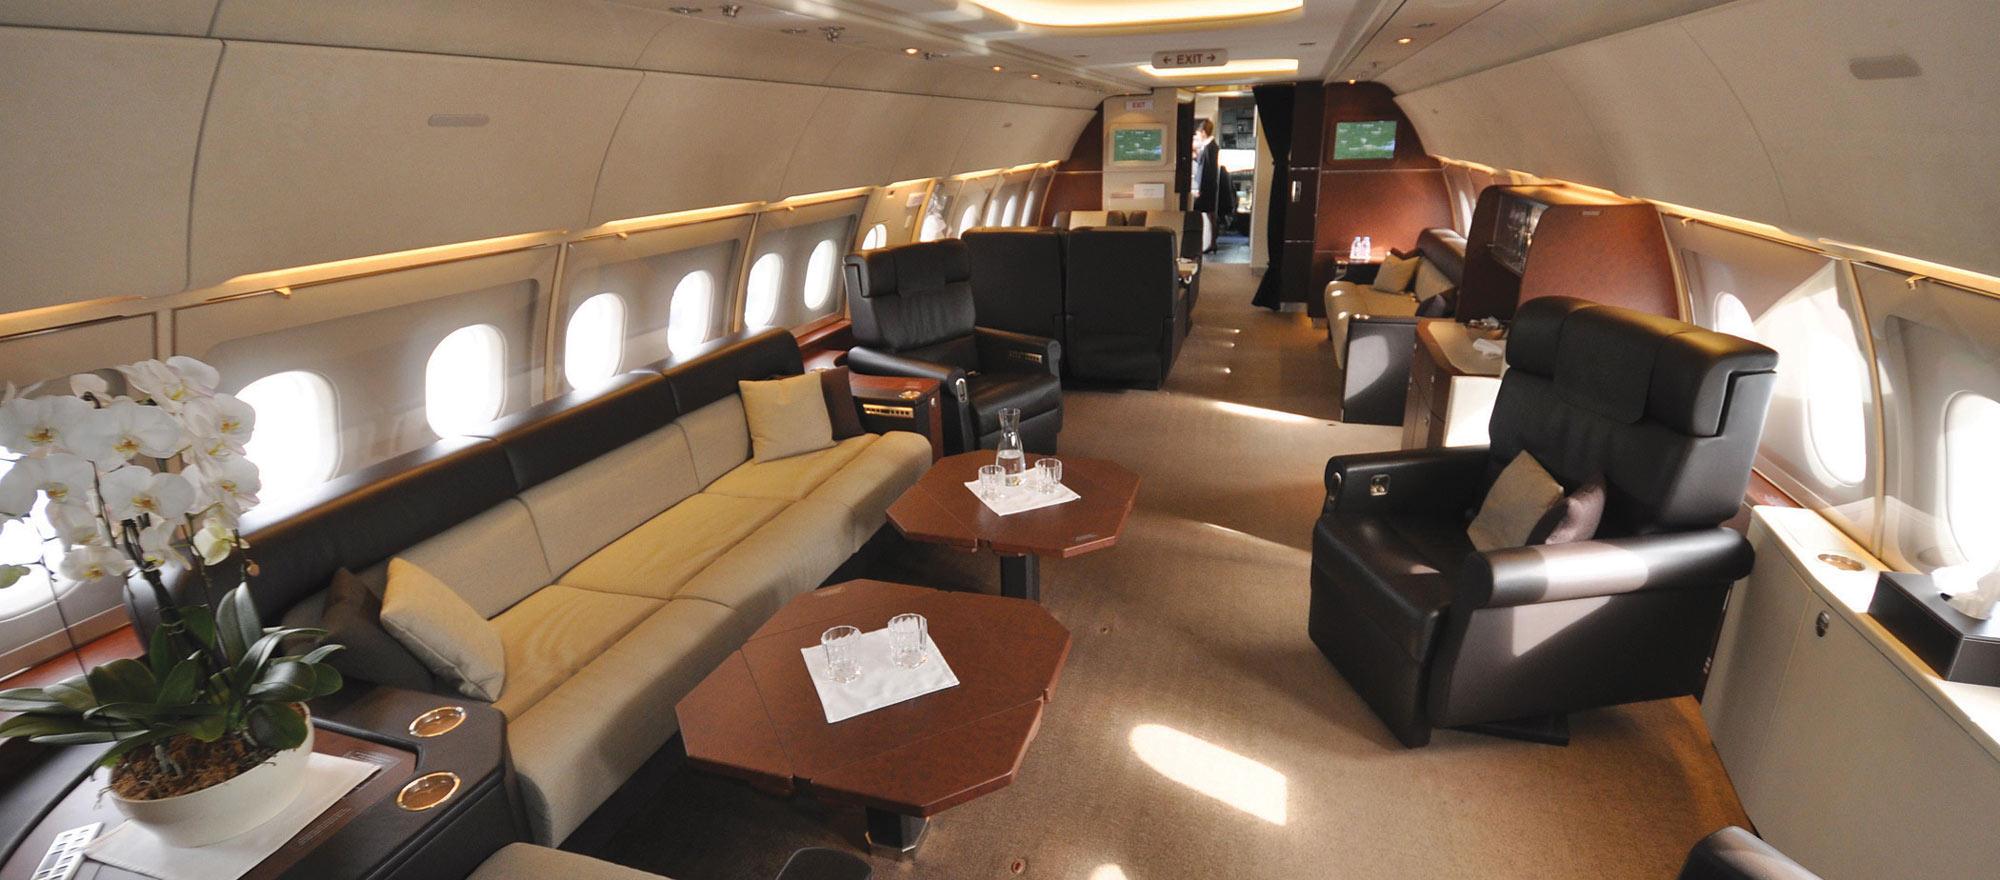 Large-cabin bizliners such as this Airbus ACJ318 offer the ultimate in comfort and space, with many often having separate living room, dining area and bedroom.